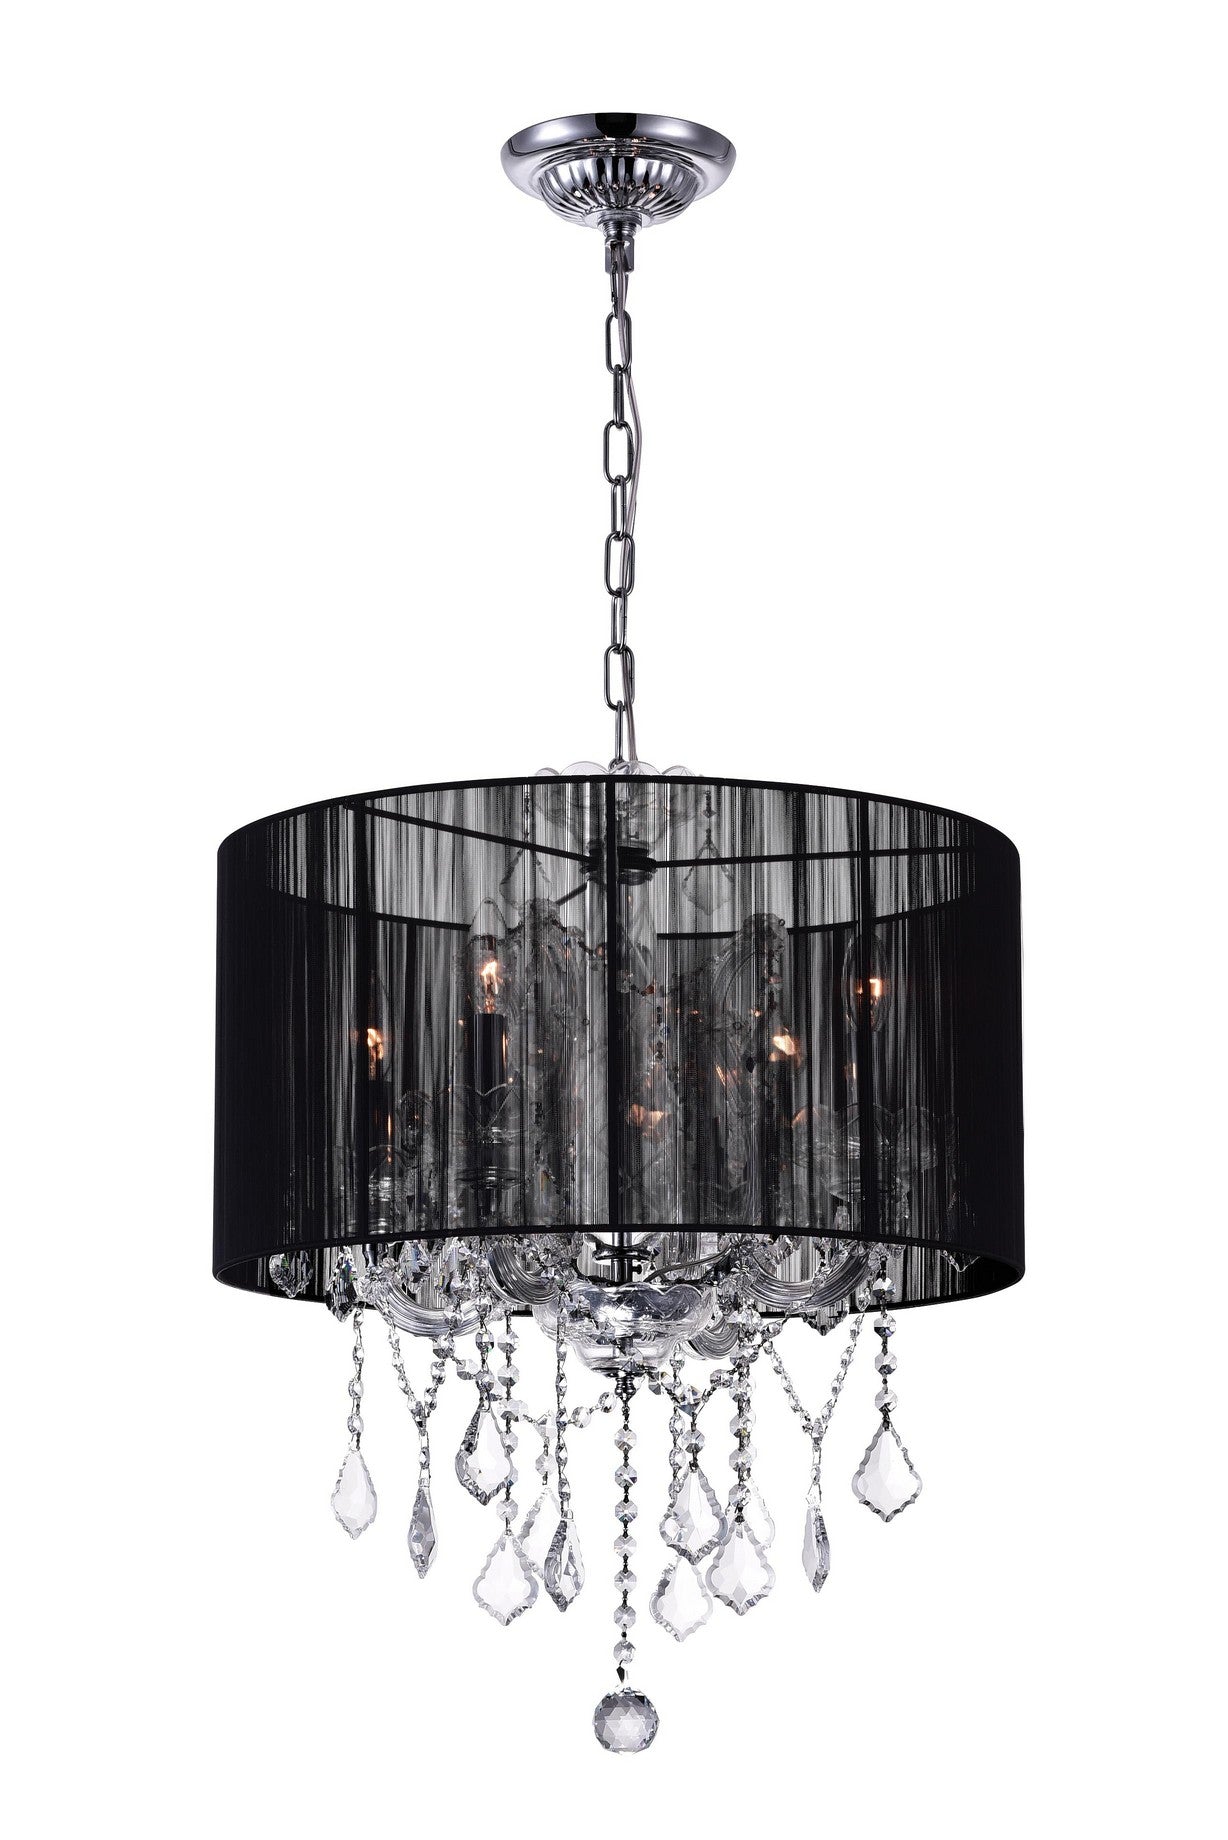 4 LIGHT UP CHANDELIER WITH CHROME FINISH - Dreamart Gallery